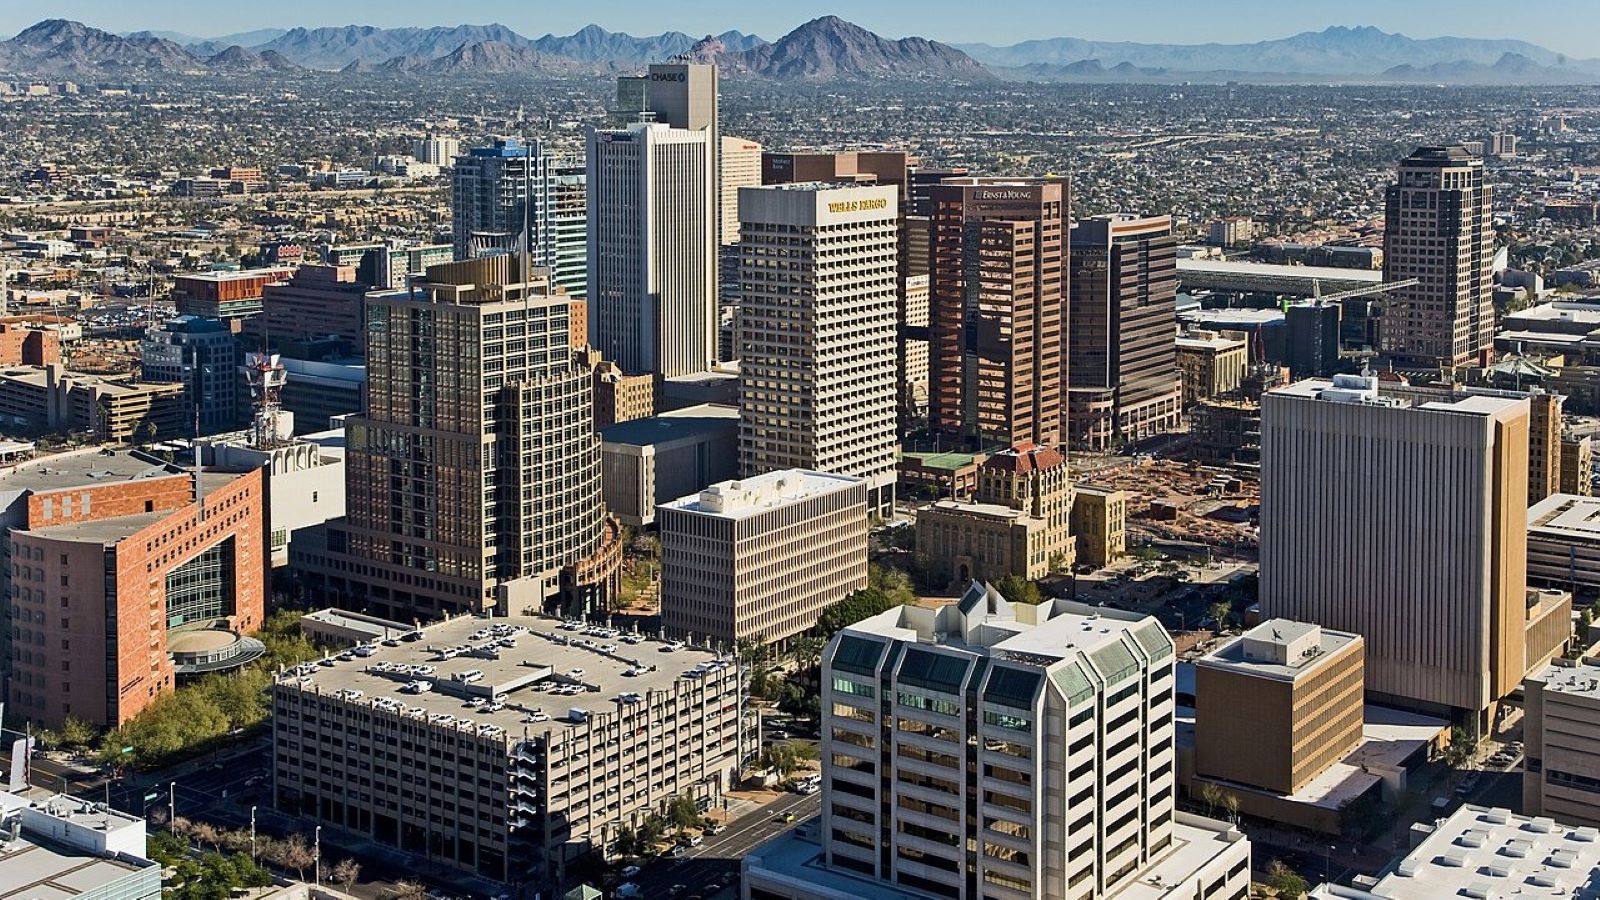 <p>According to Haley, Phoenix has been one of the most affordable cities in the country for a long time. He says that people will seek it out with the fall weather and outdoor space. Although the desert climate might not be for everyone, its sunny days and warm nights make it an appealing option for those coming from the cold of the north.</p> <p>The current cost of living in Phoenix is around $3,580.08 for a family of four.</p>